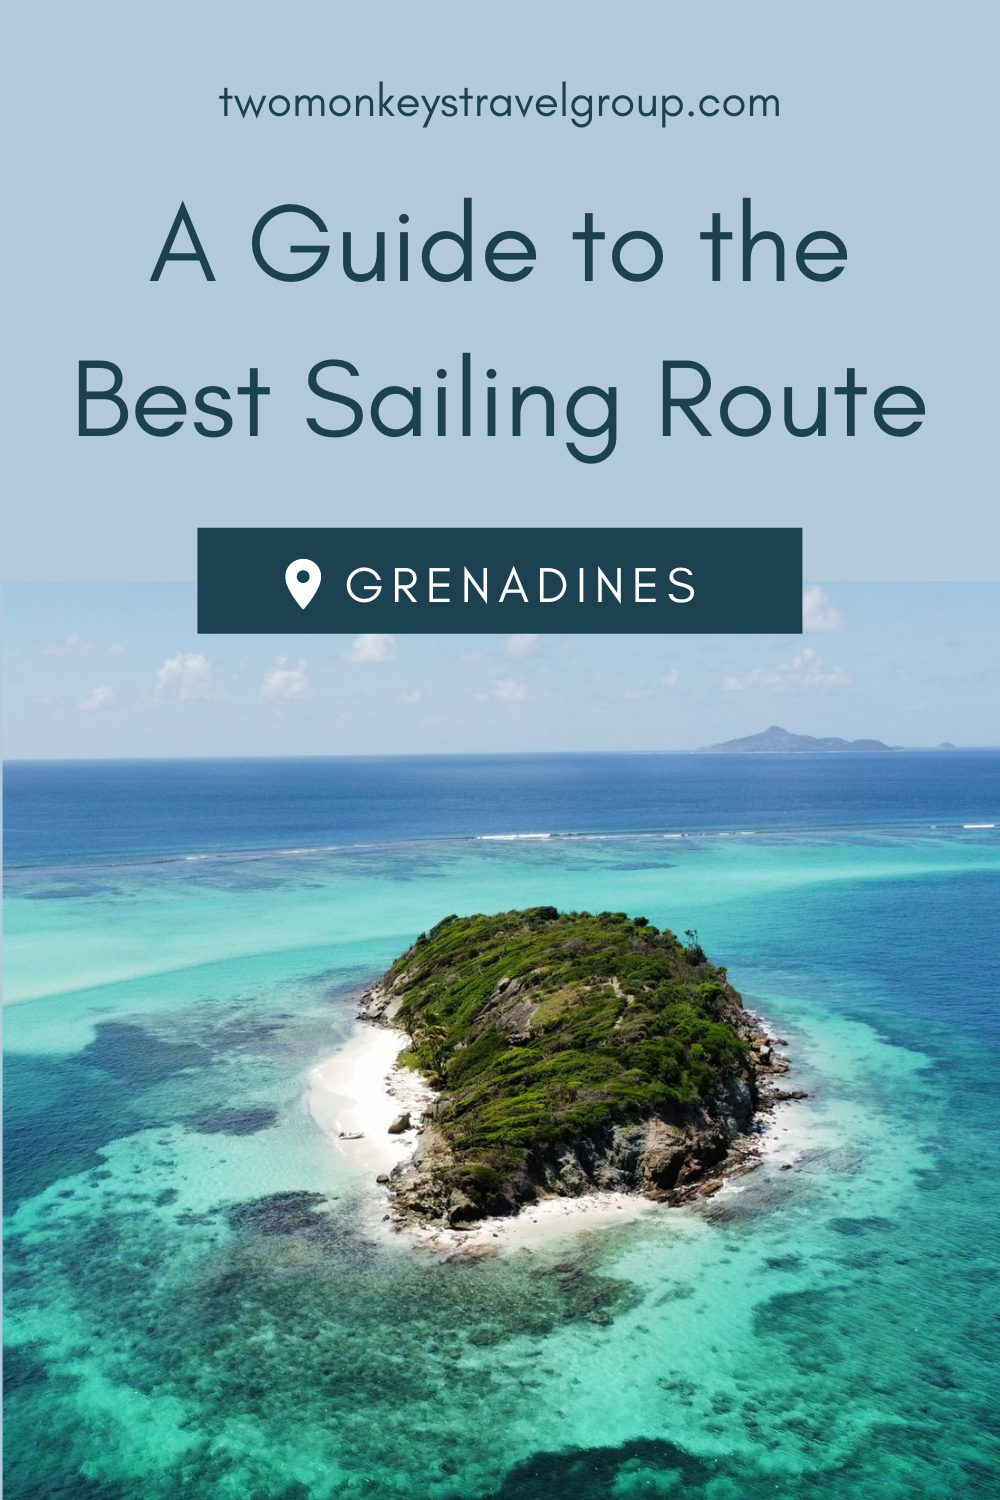 A Guide to the Best Sailing Route Round the Grenadines